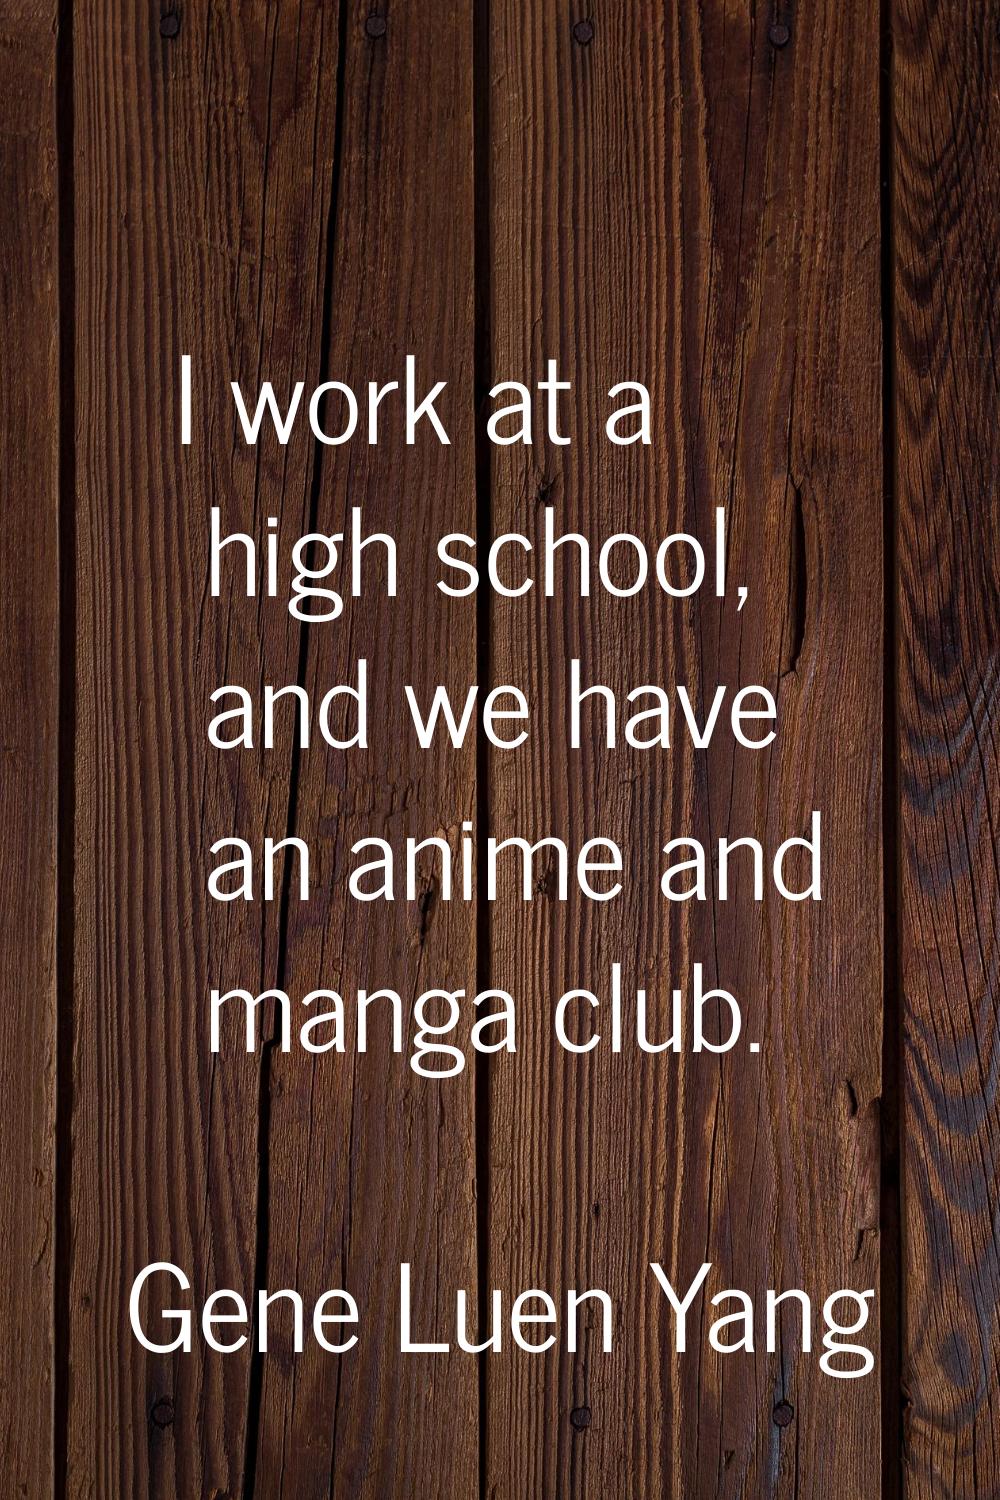 I work at a high school, and we have an anime and manga club.